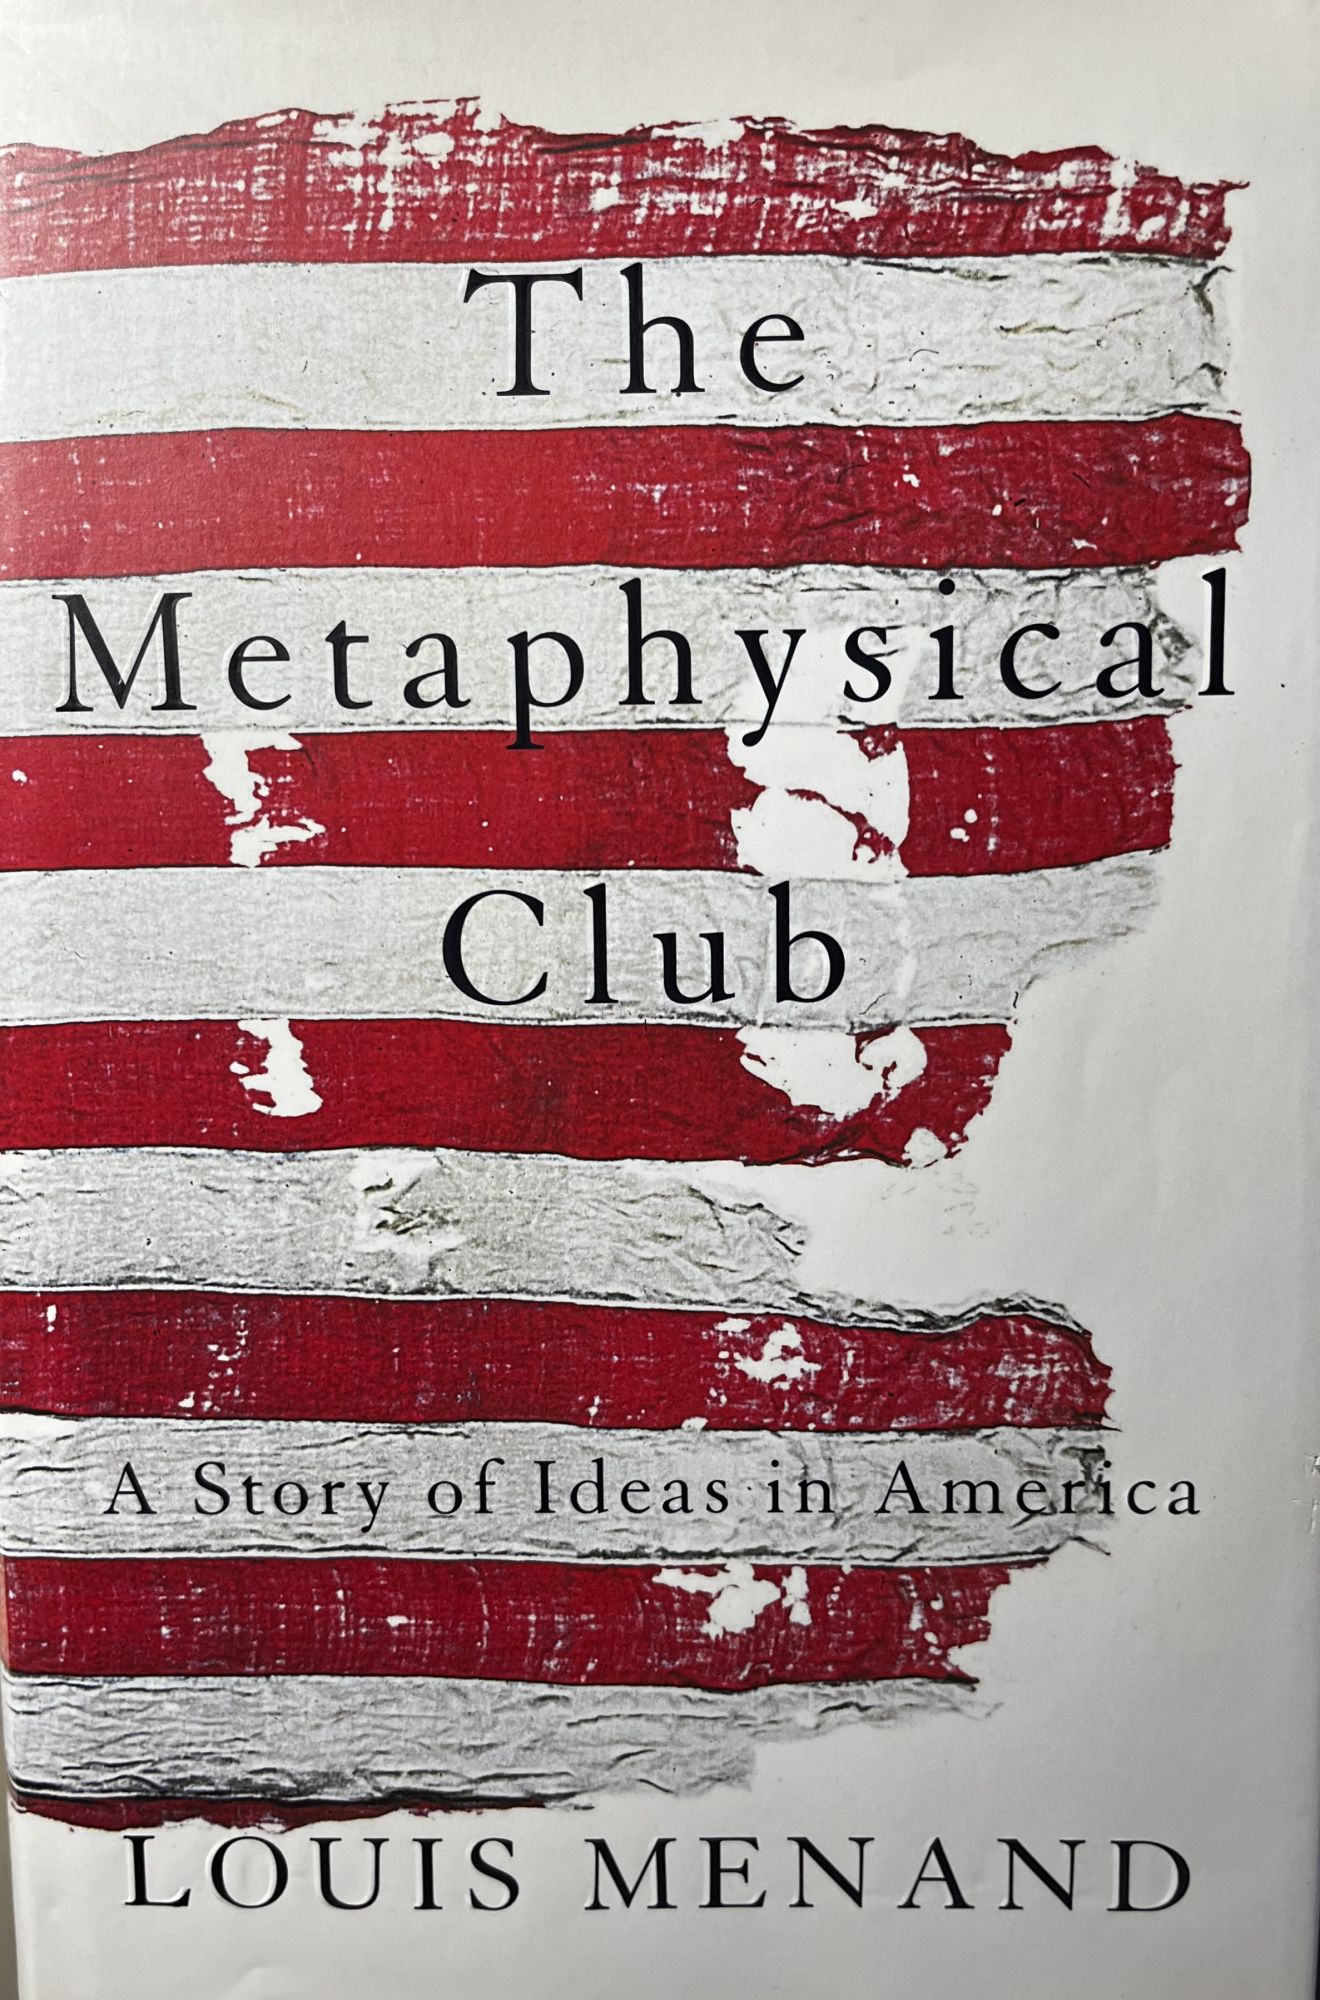 The Metaphysical Club by Louis Menand First edition 3rd printing